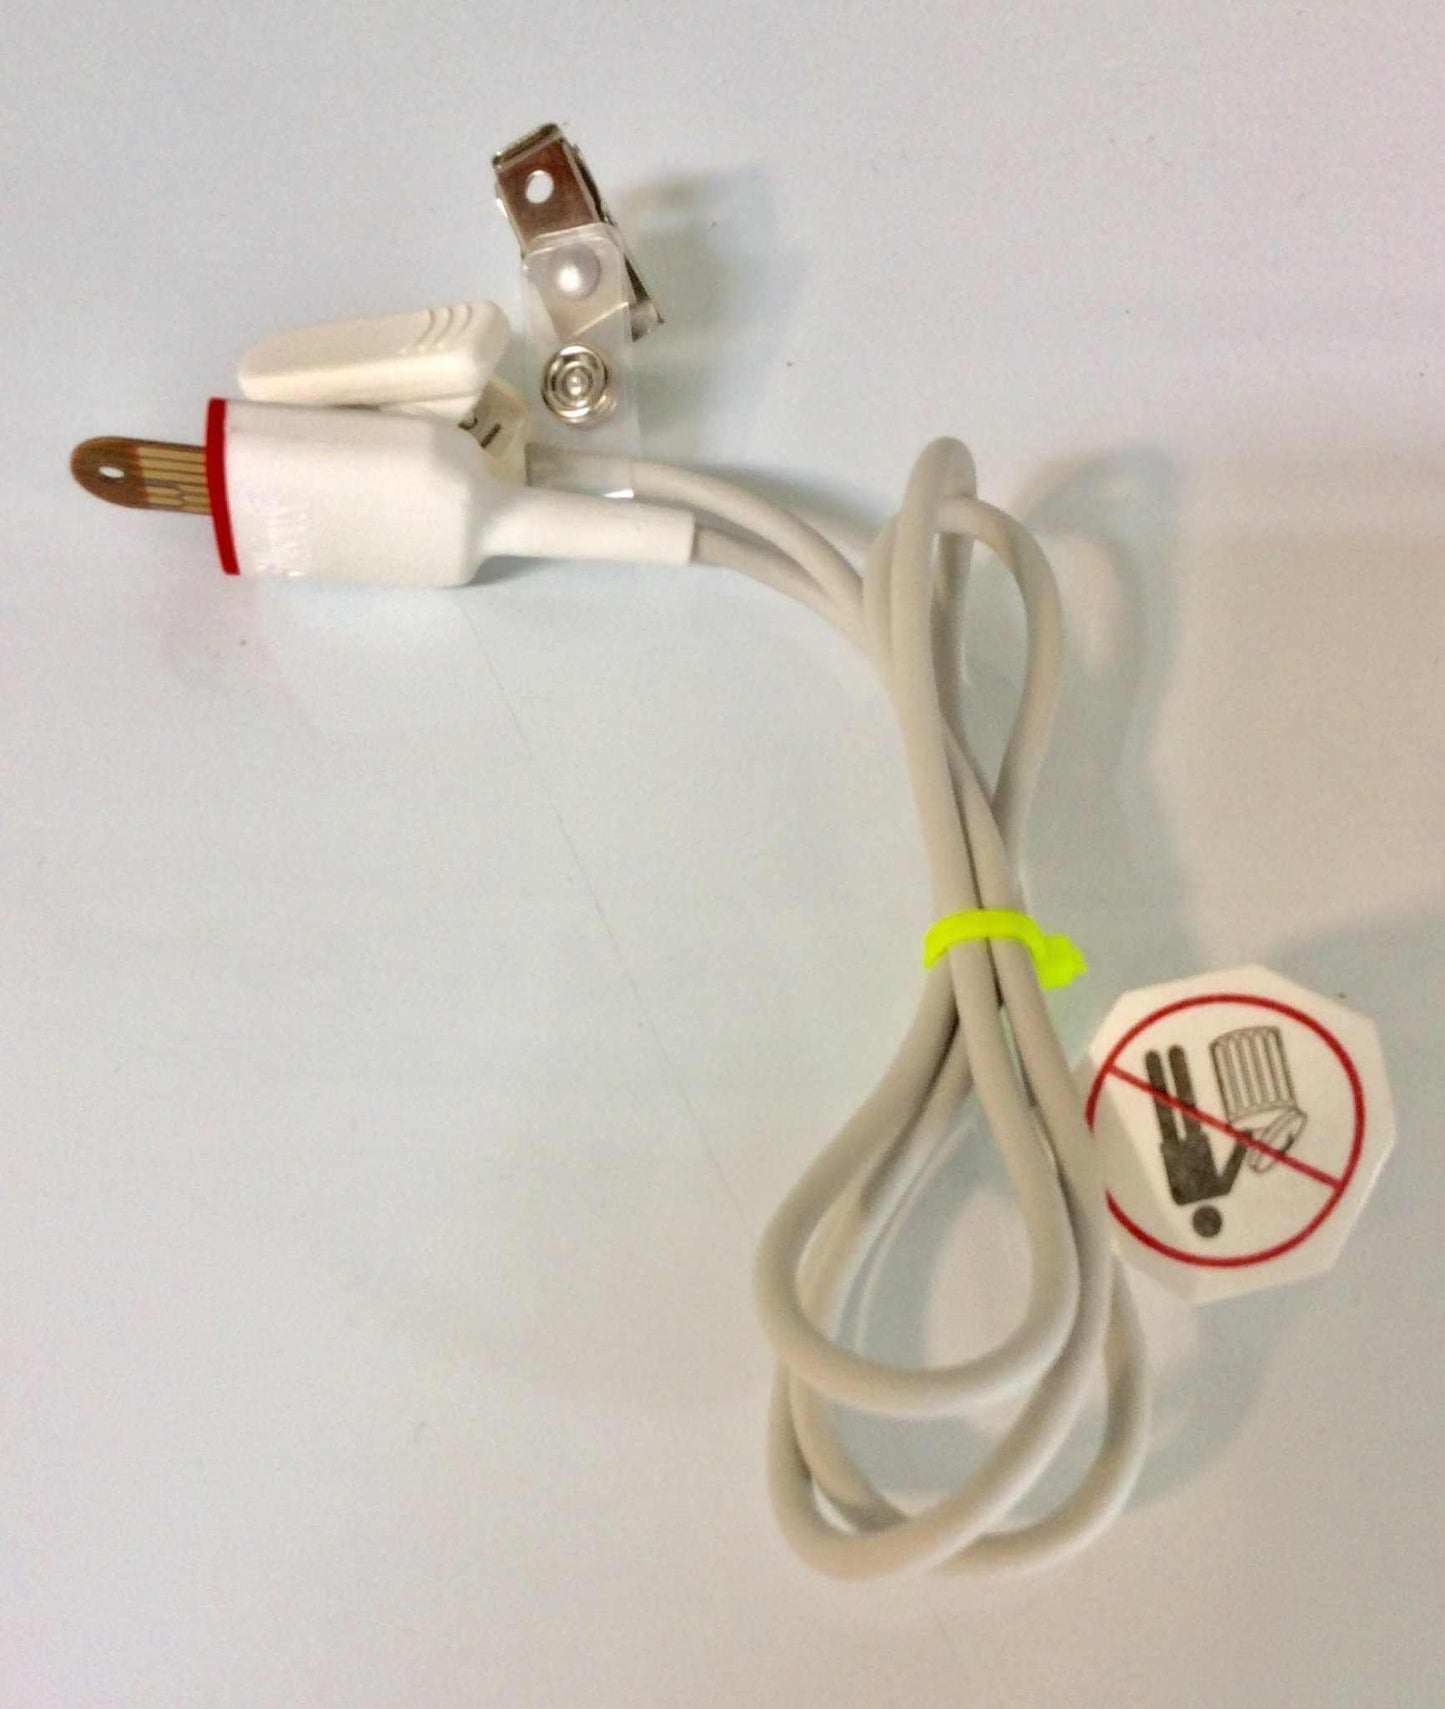 USED Masimo Ear Clip Sensor LNOP Warranty FREE Shippping - MBR Medicals